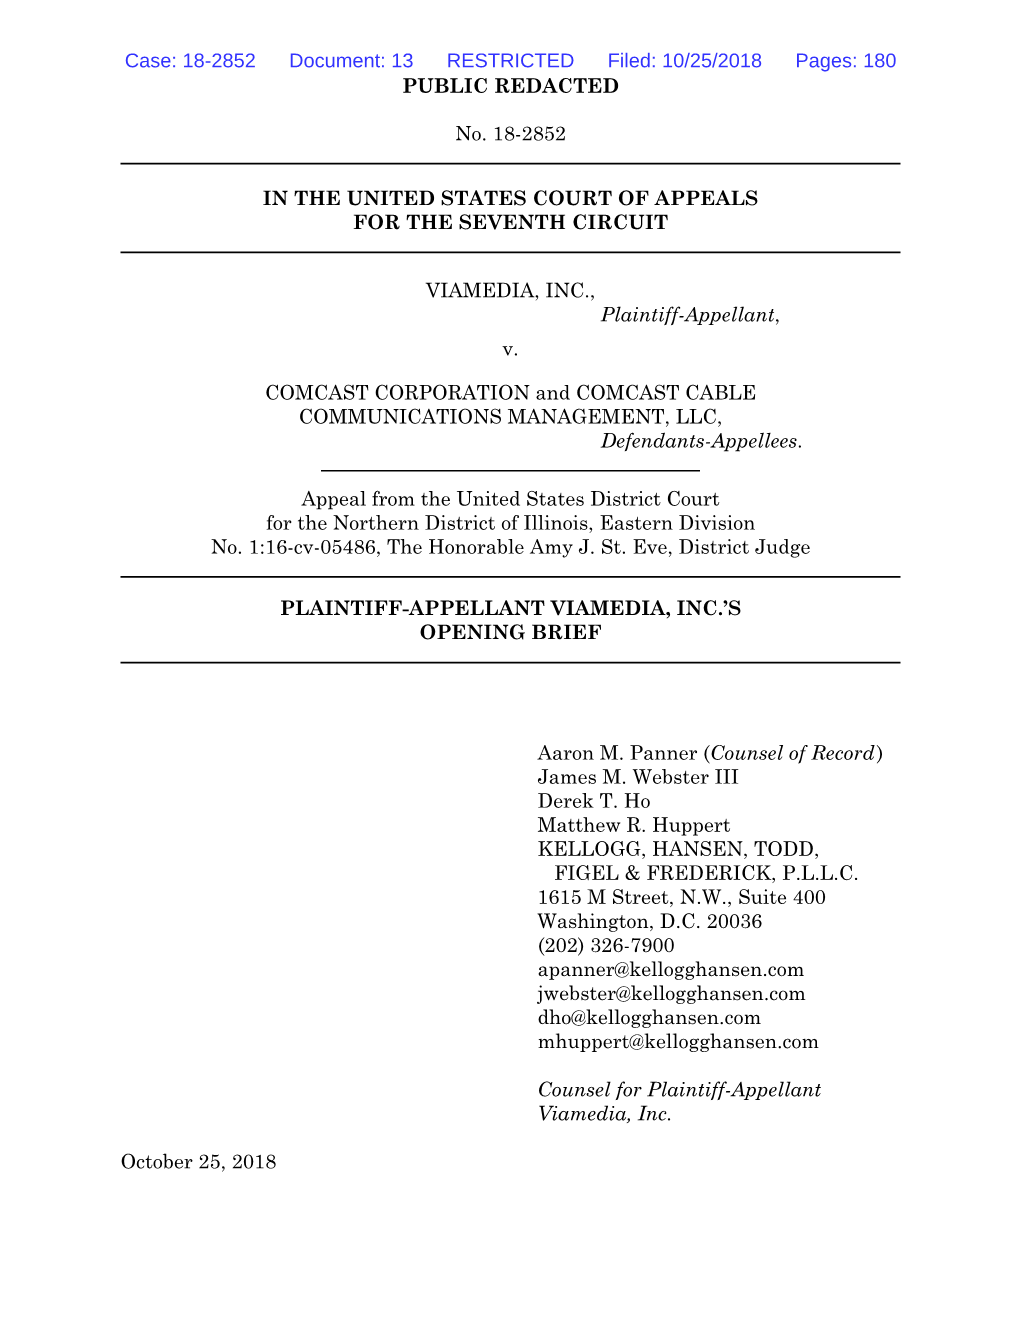 U.S. Court of Appeals for the Seventh Circuit